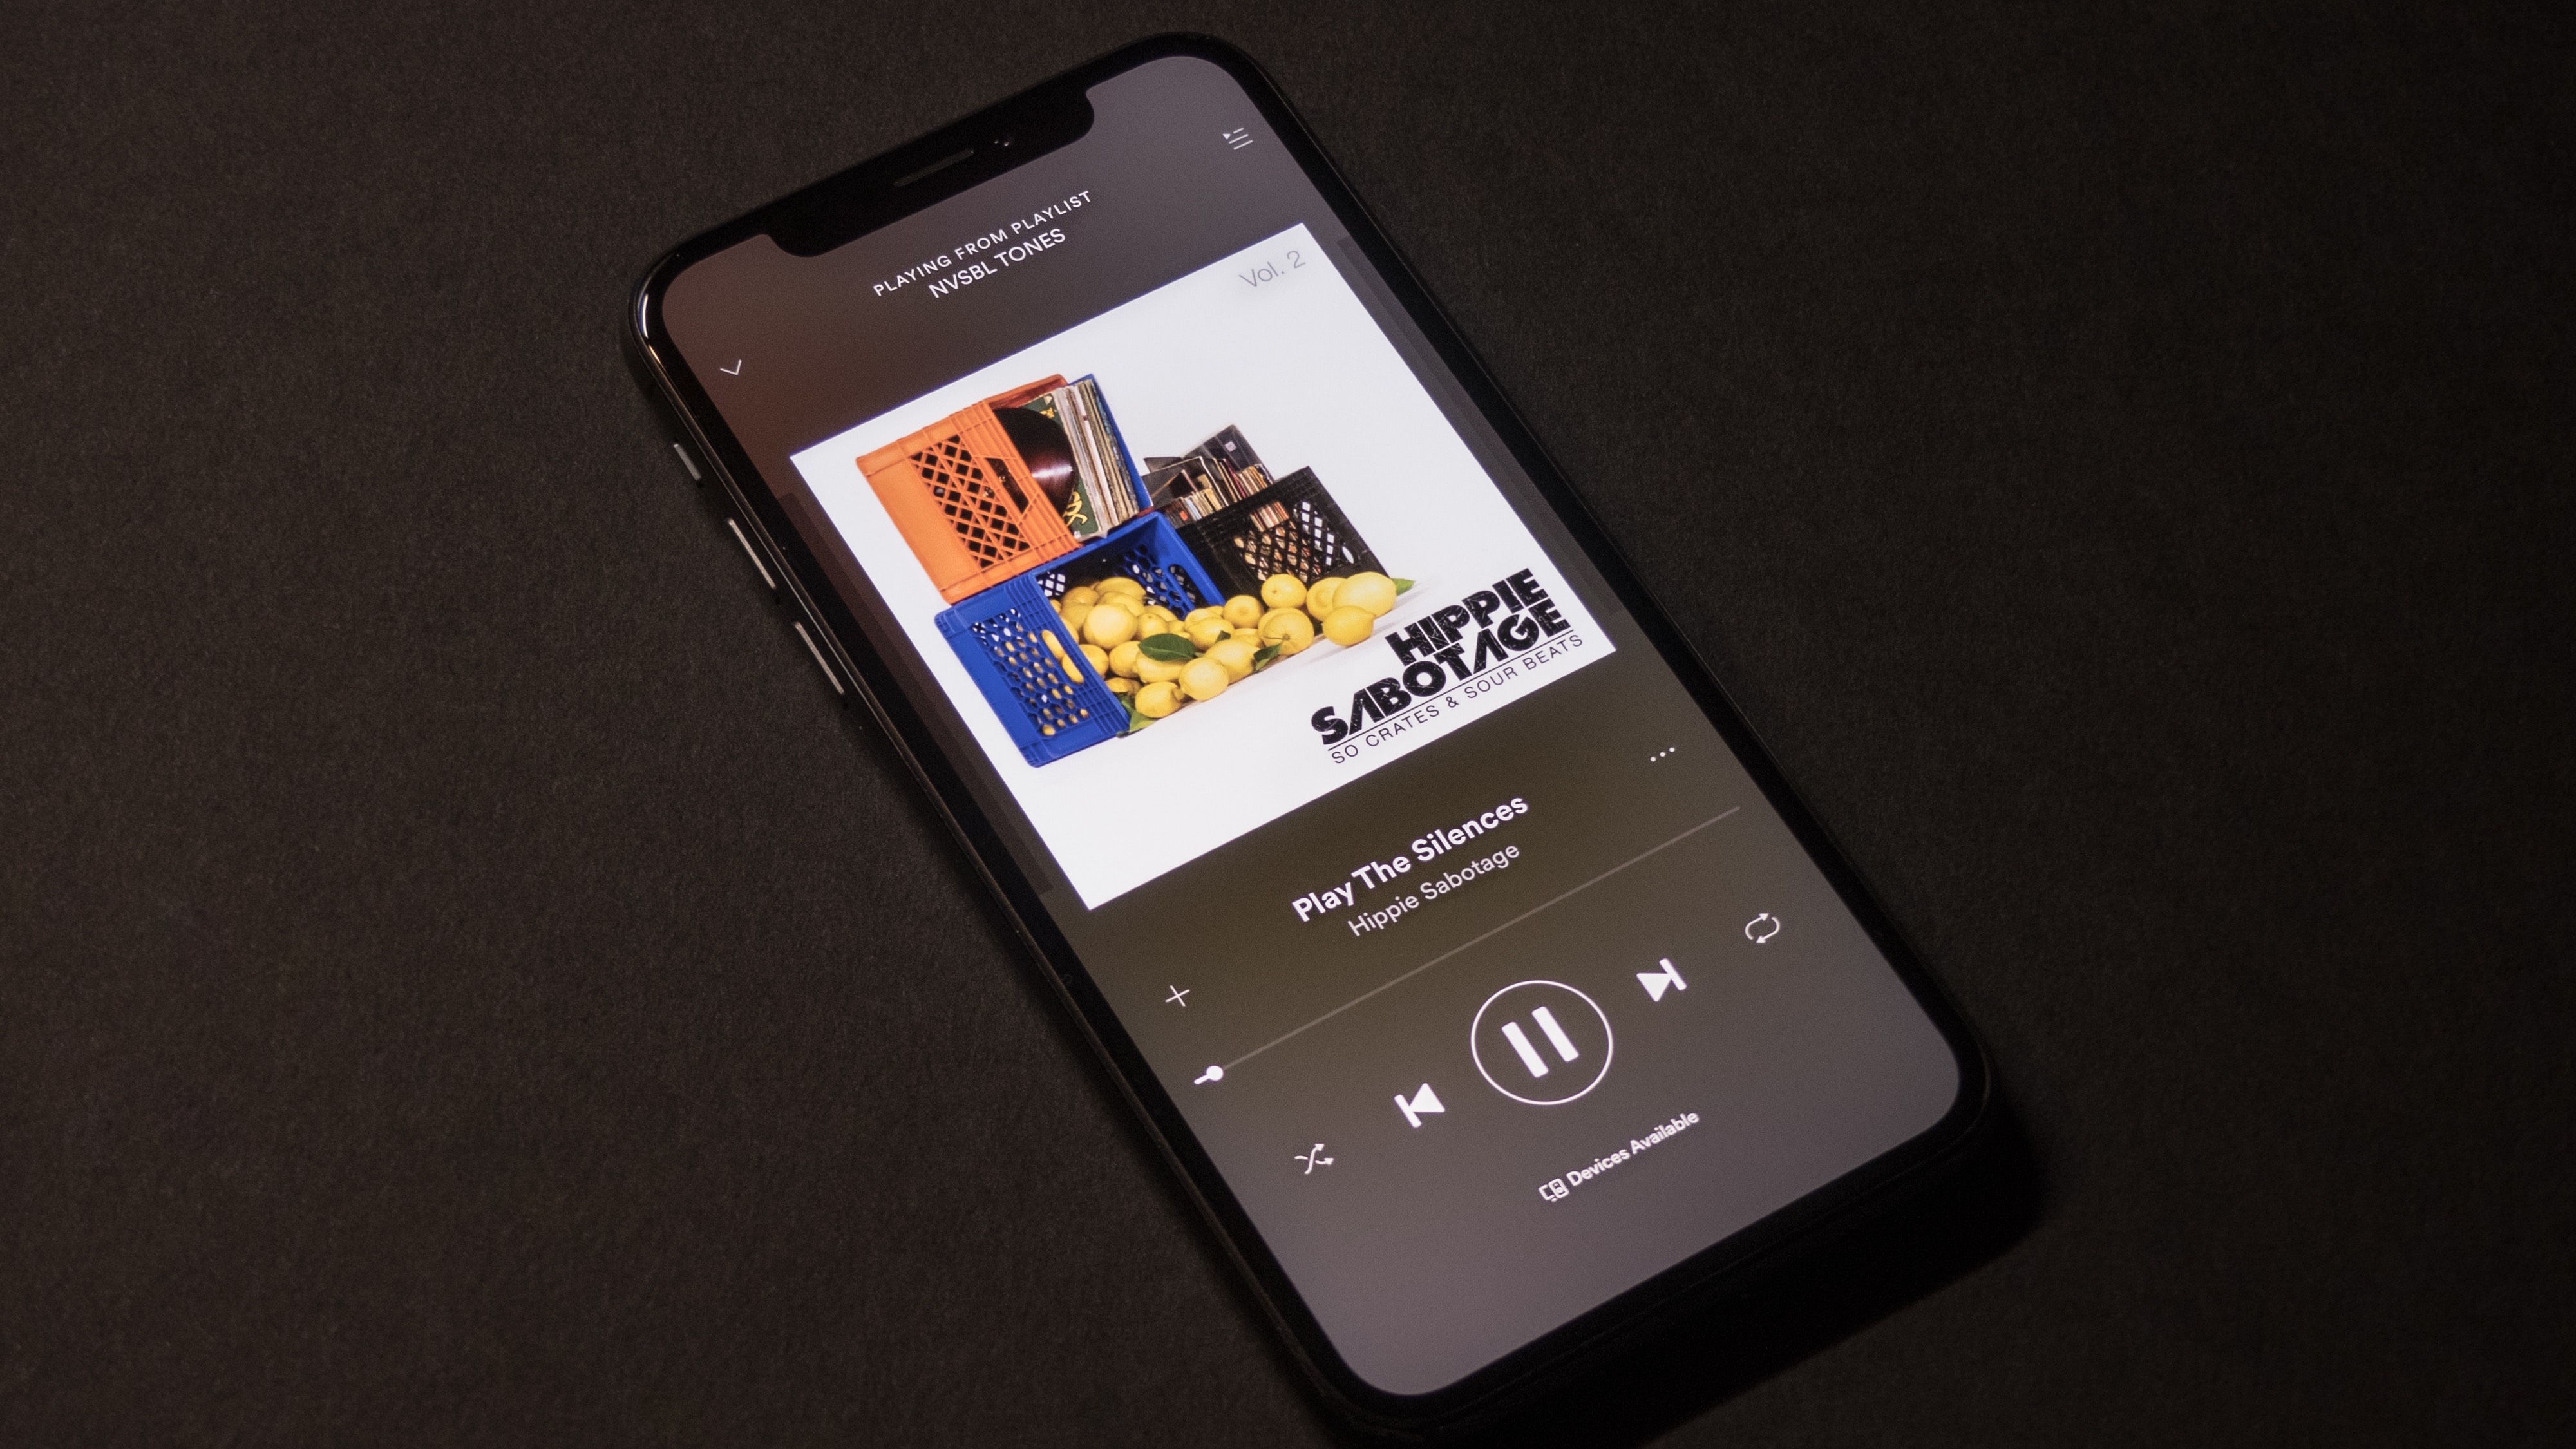 Spotify 1.2.13.661 download the last version for apple